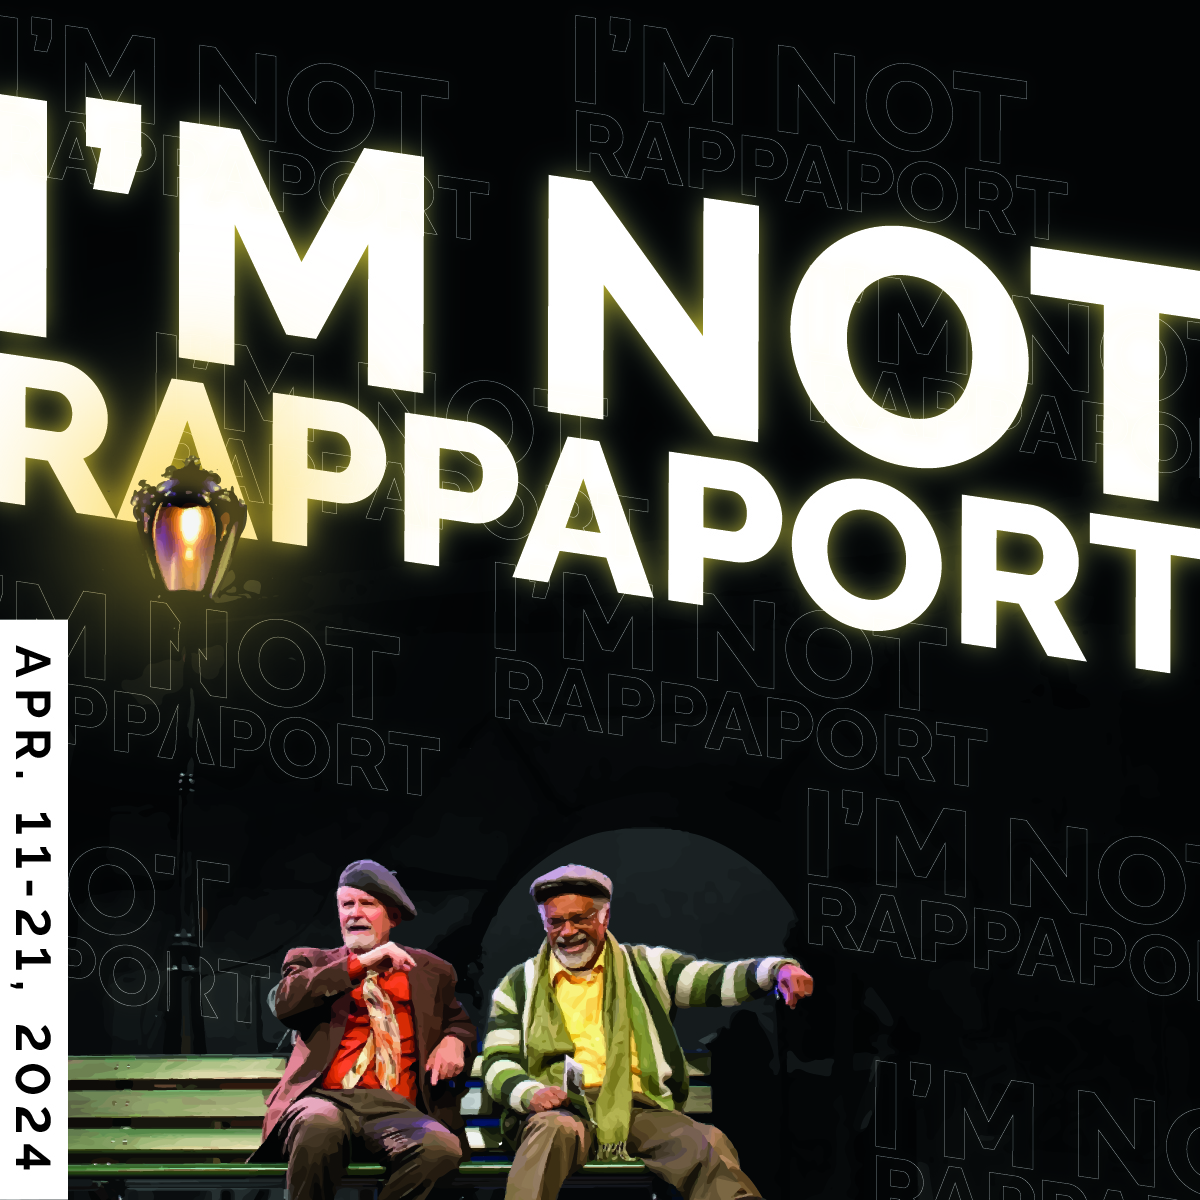 I'm not Rappaport